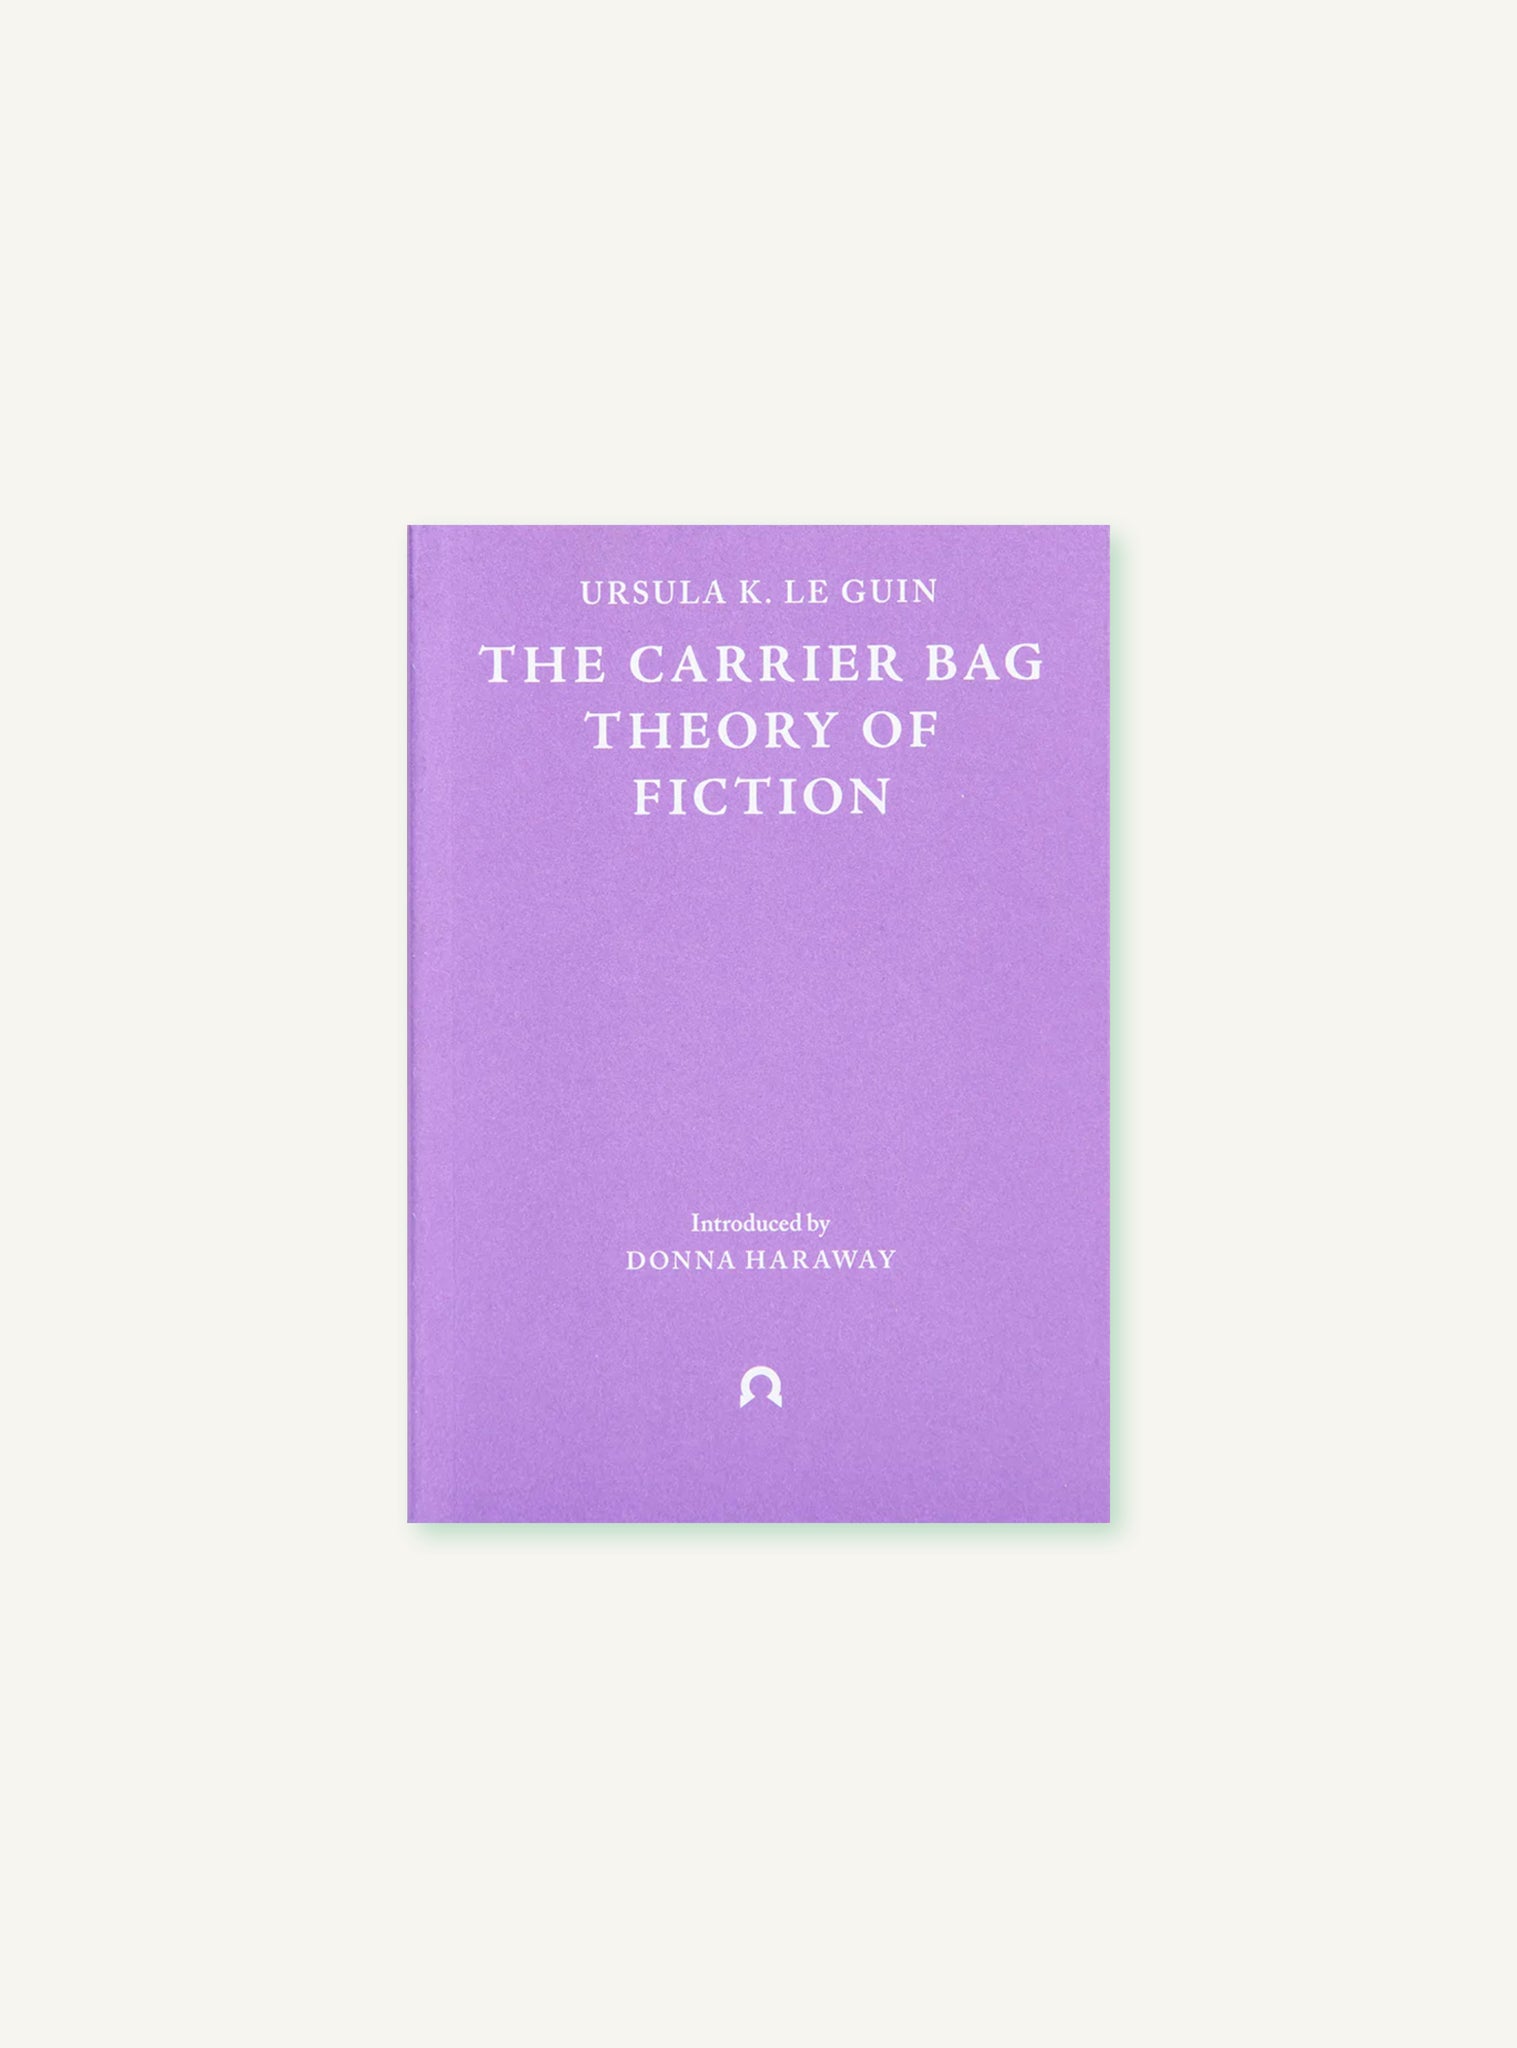 THE CARRIER BAG THEORY OF FICTION By Ursula K. Le Guin